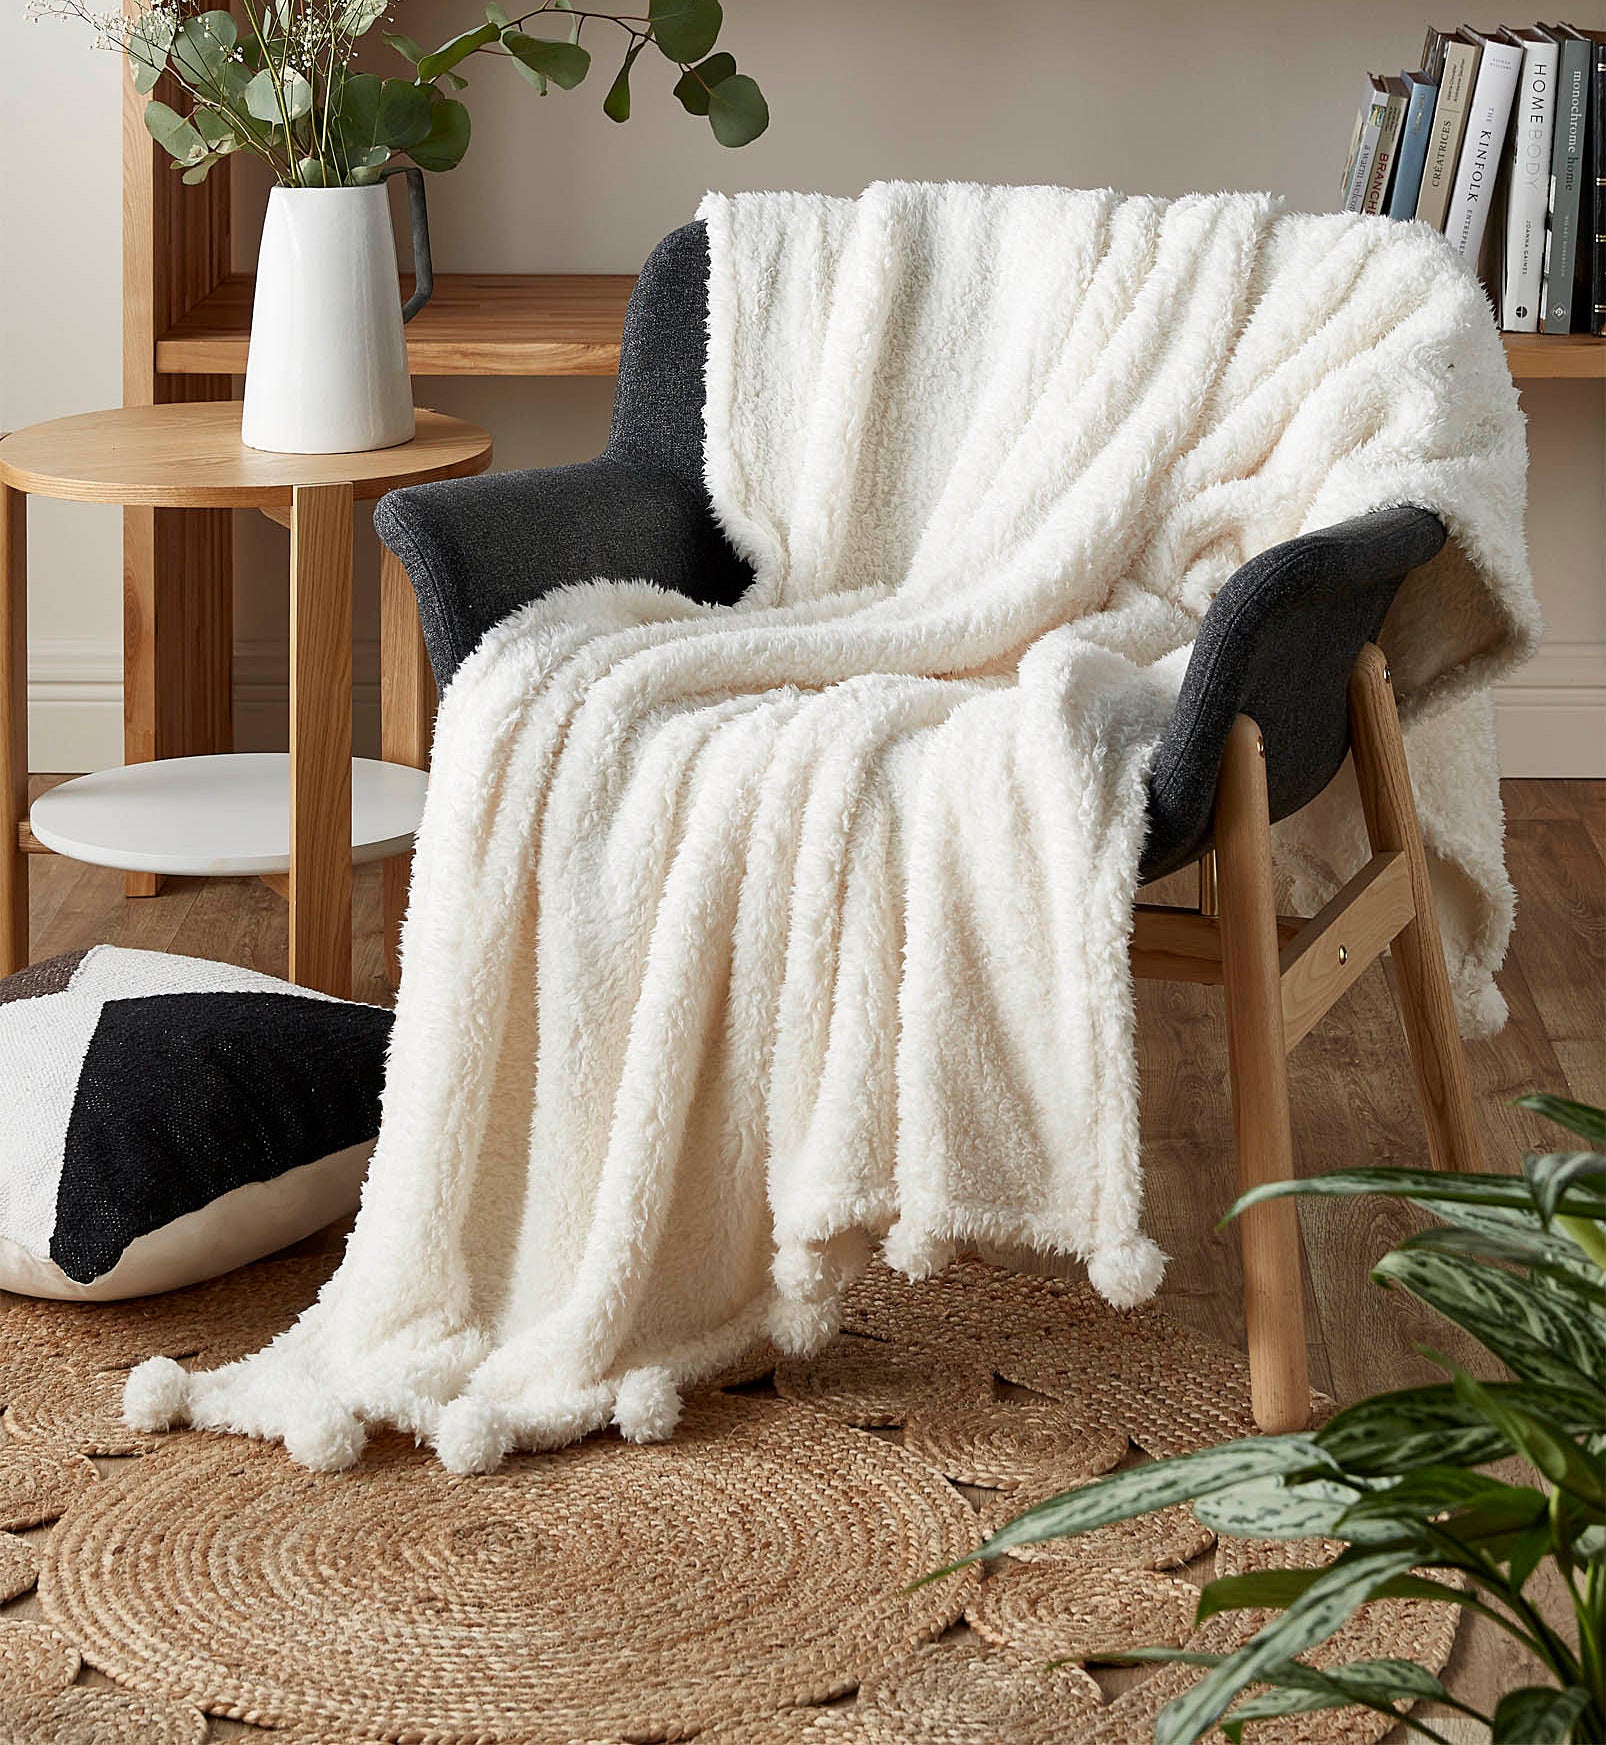 A soft sherpa blanket with pom poms on the trim draped over a chair